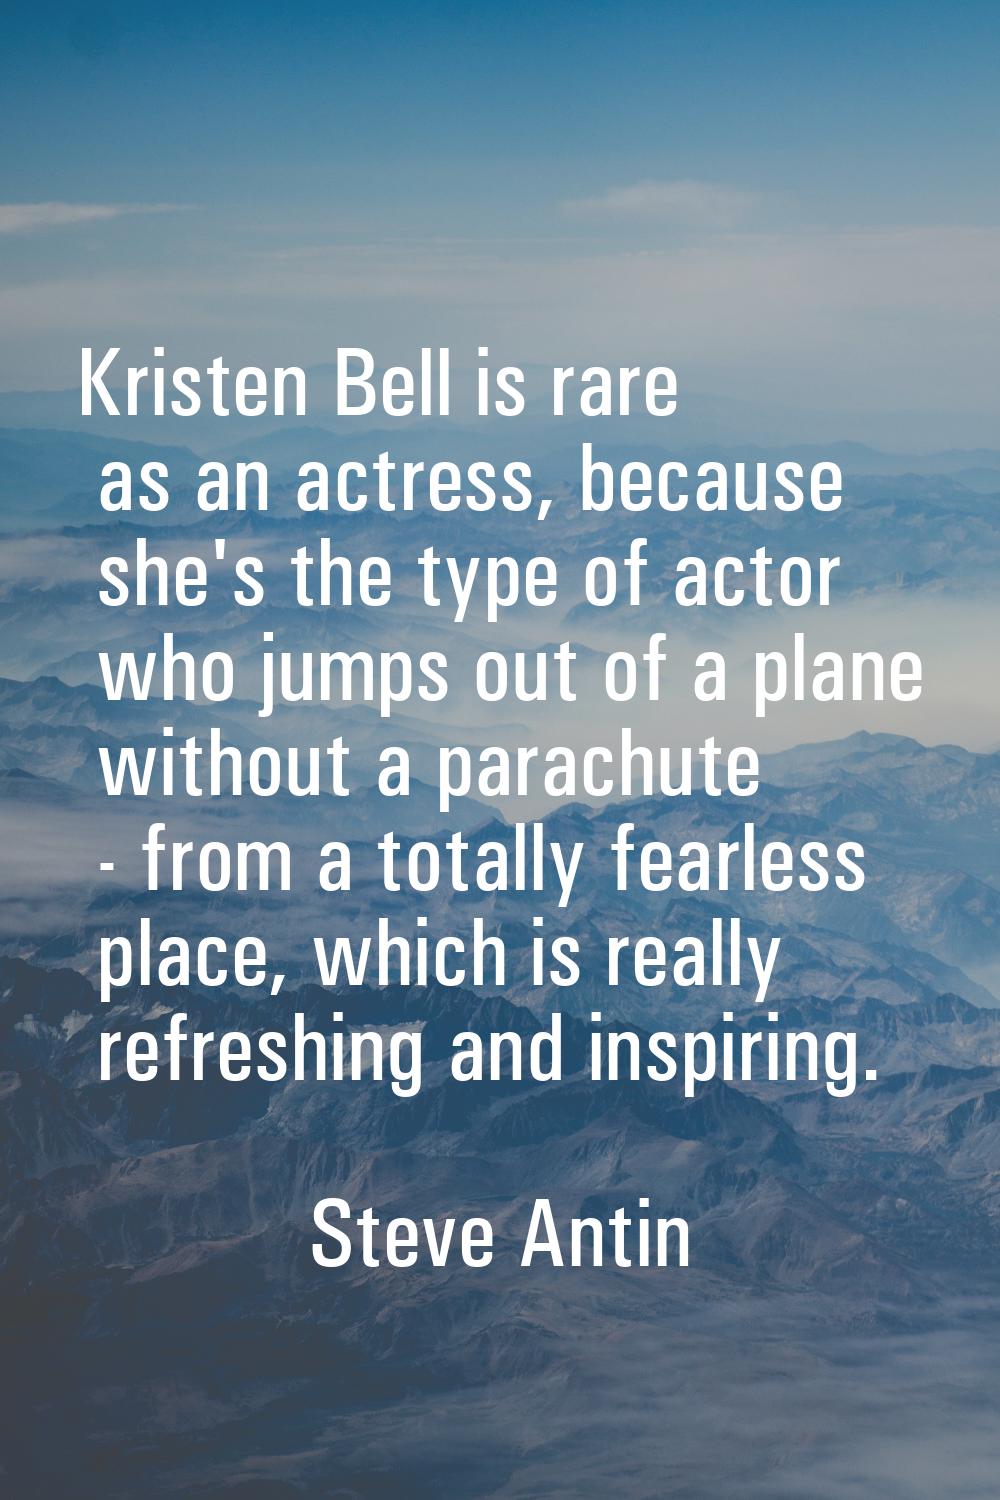 Kristen Bell is rare as an actress, because she's the type of actor who jumps out of a plane withou